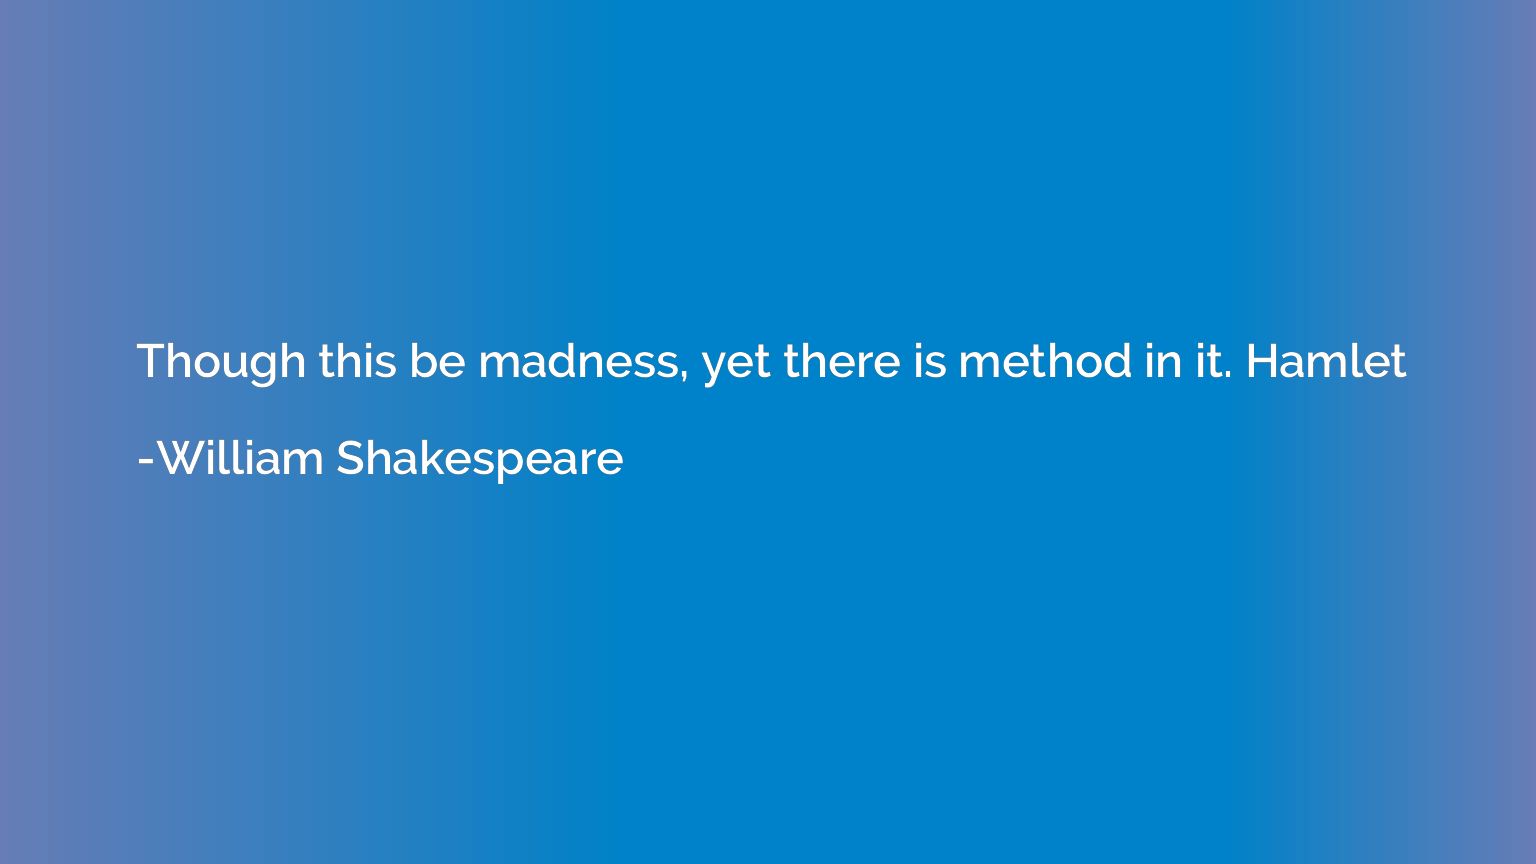 Though this be madness, yet there is method in it. Hamlet